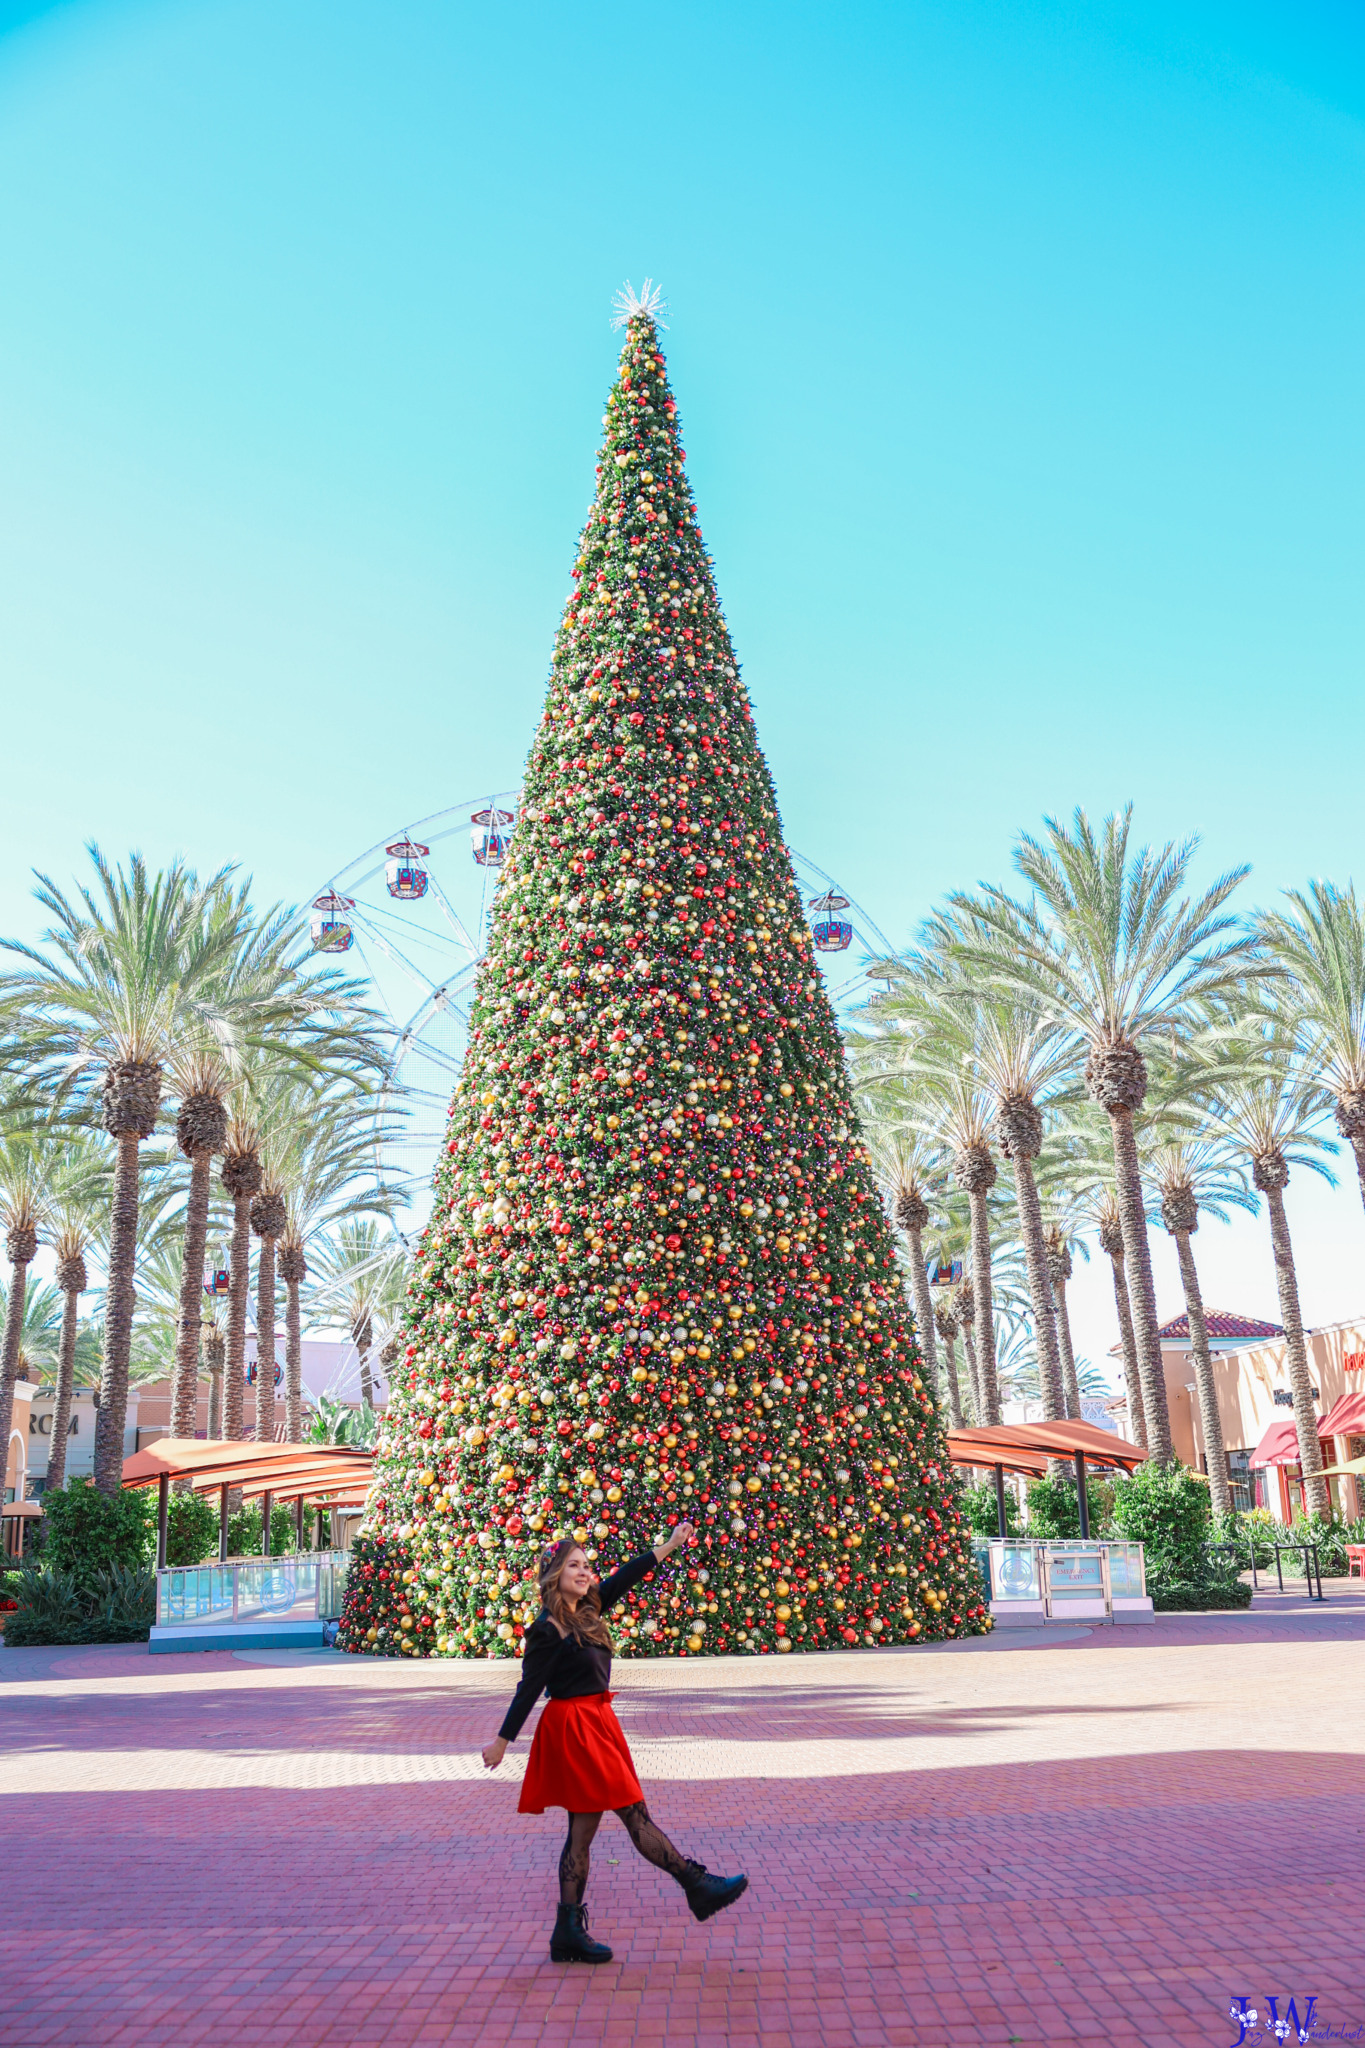 Irvine Spectrum Christmas Tree in Southern California. Photography by Jaz Wanderlust.